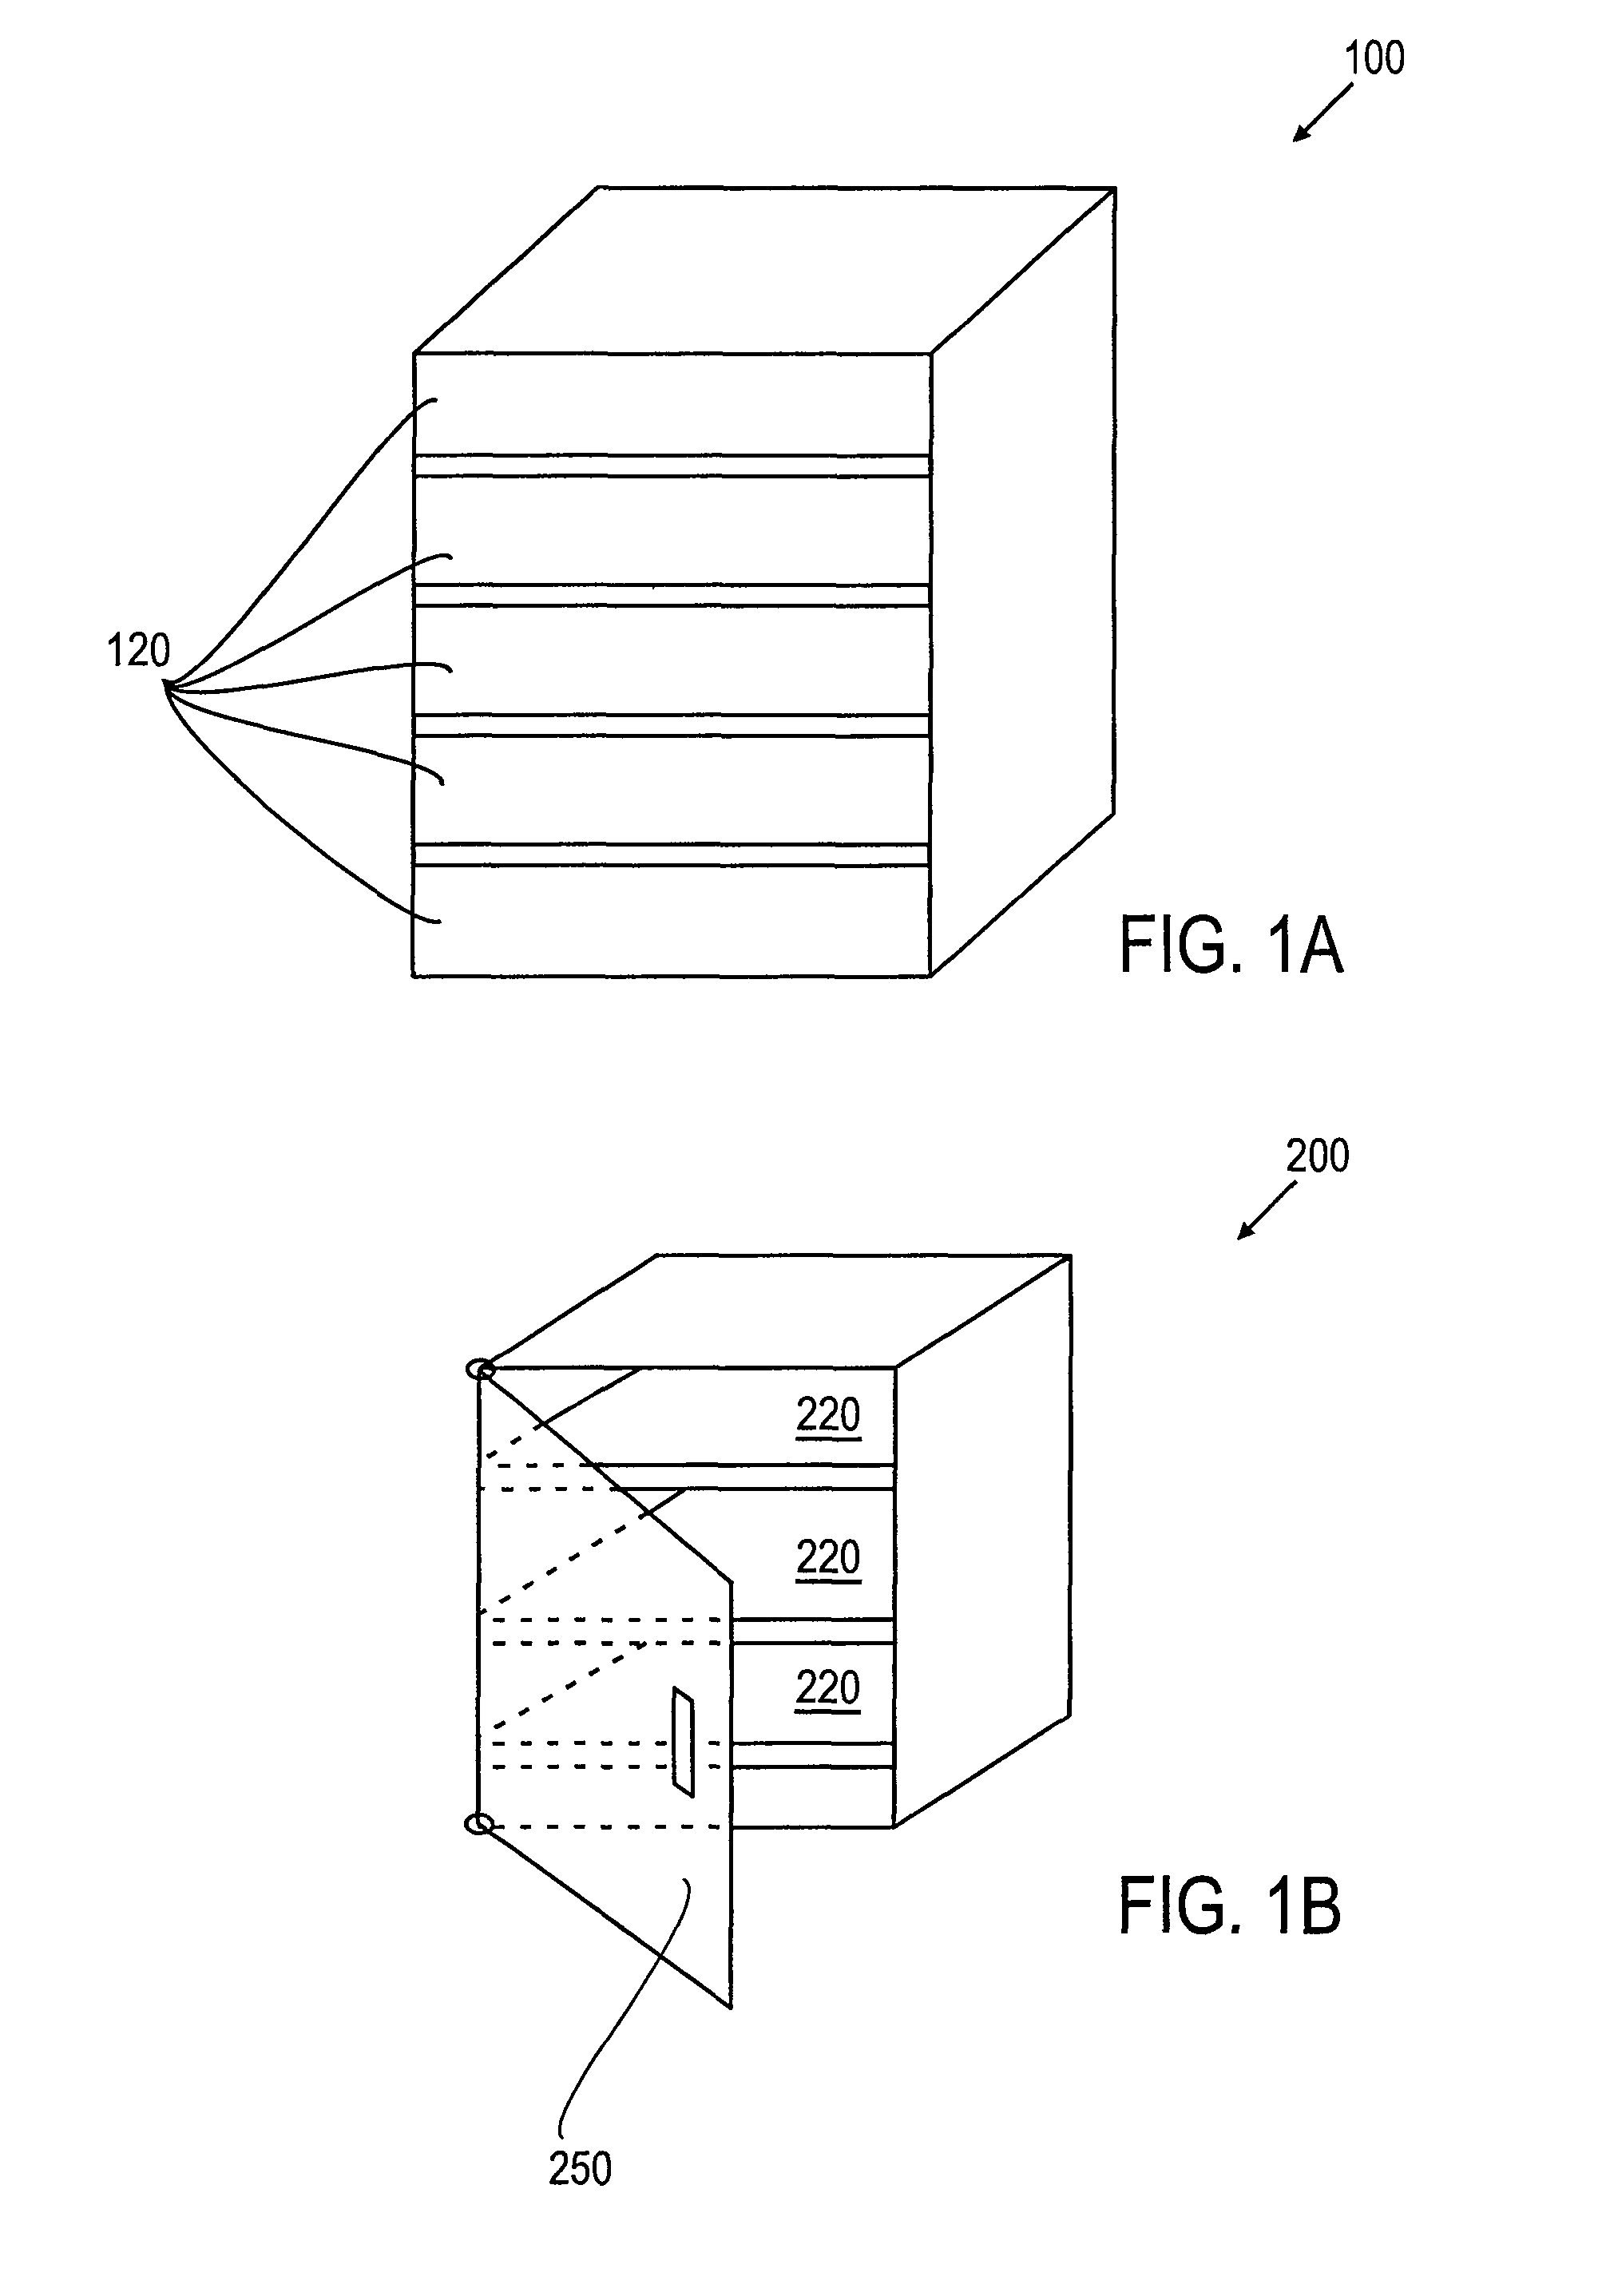 Image-based inventory control system and method